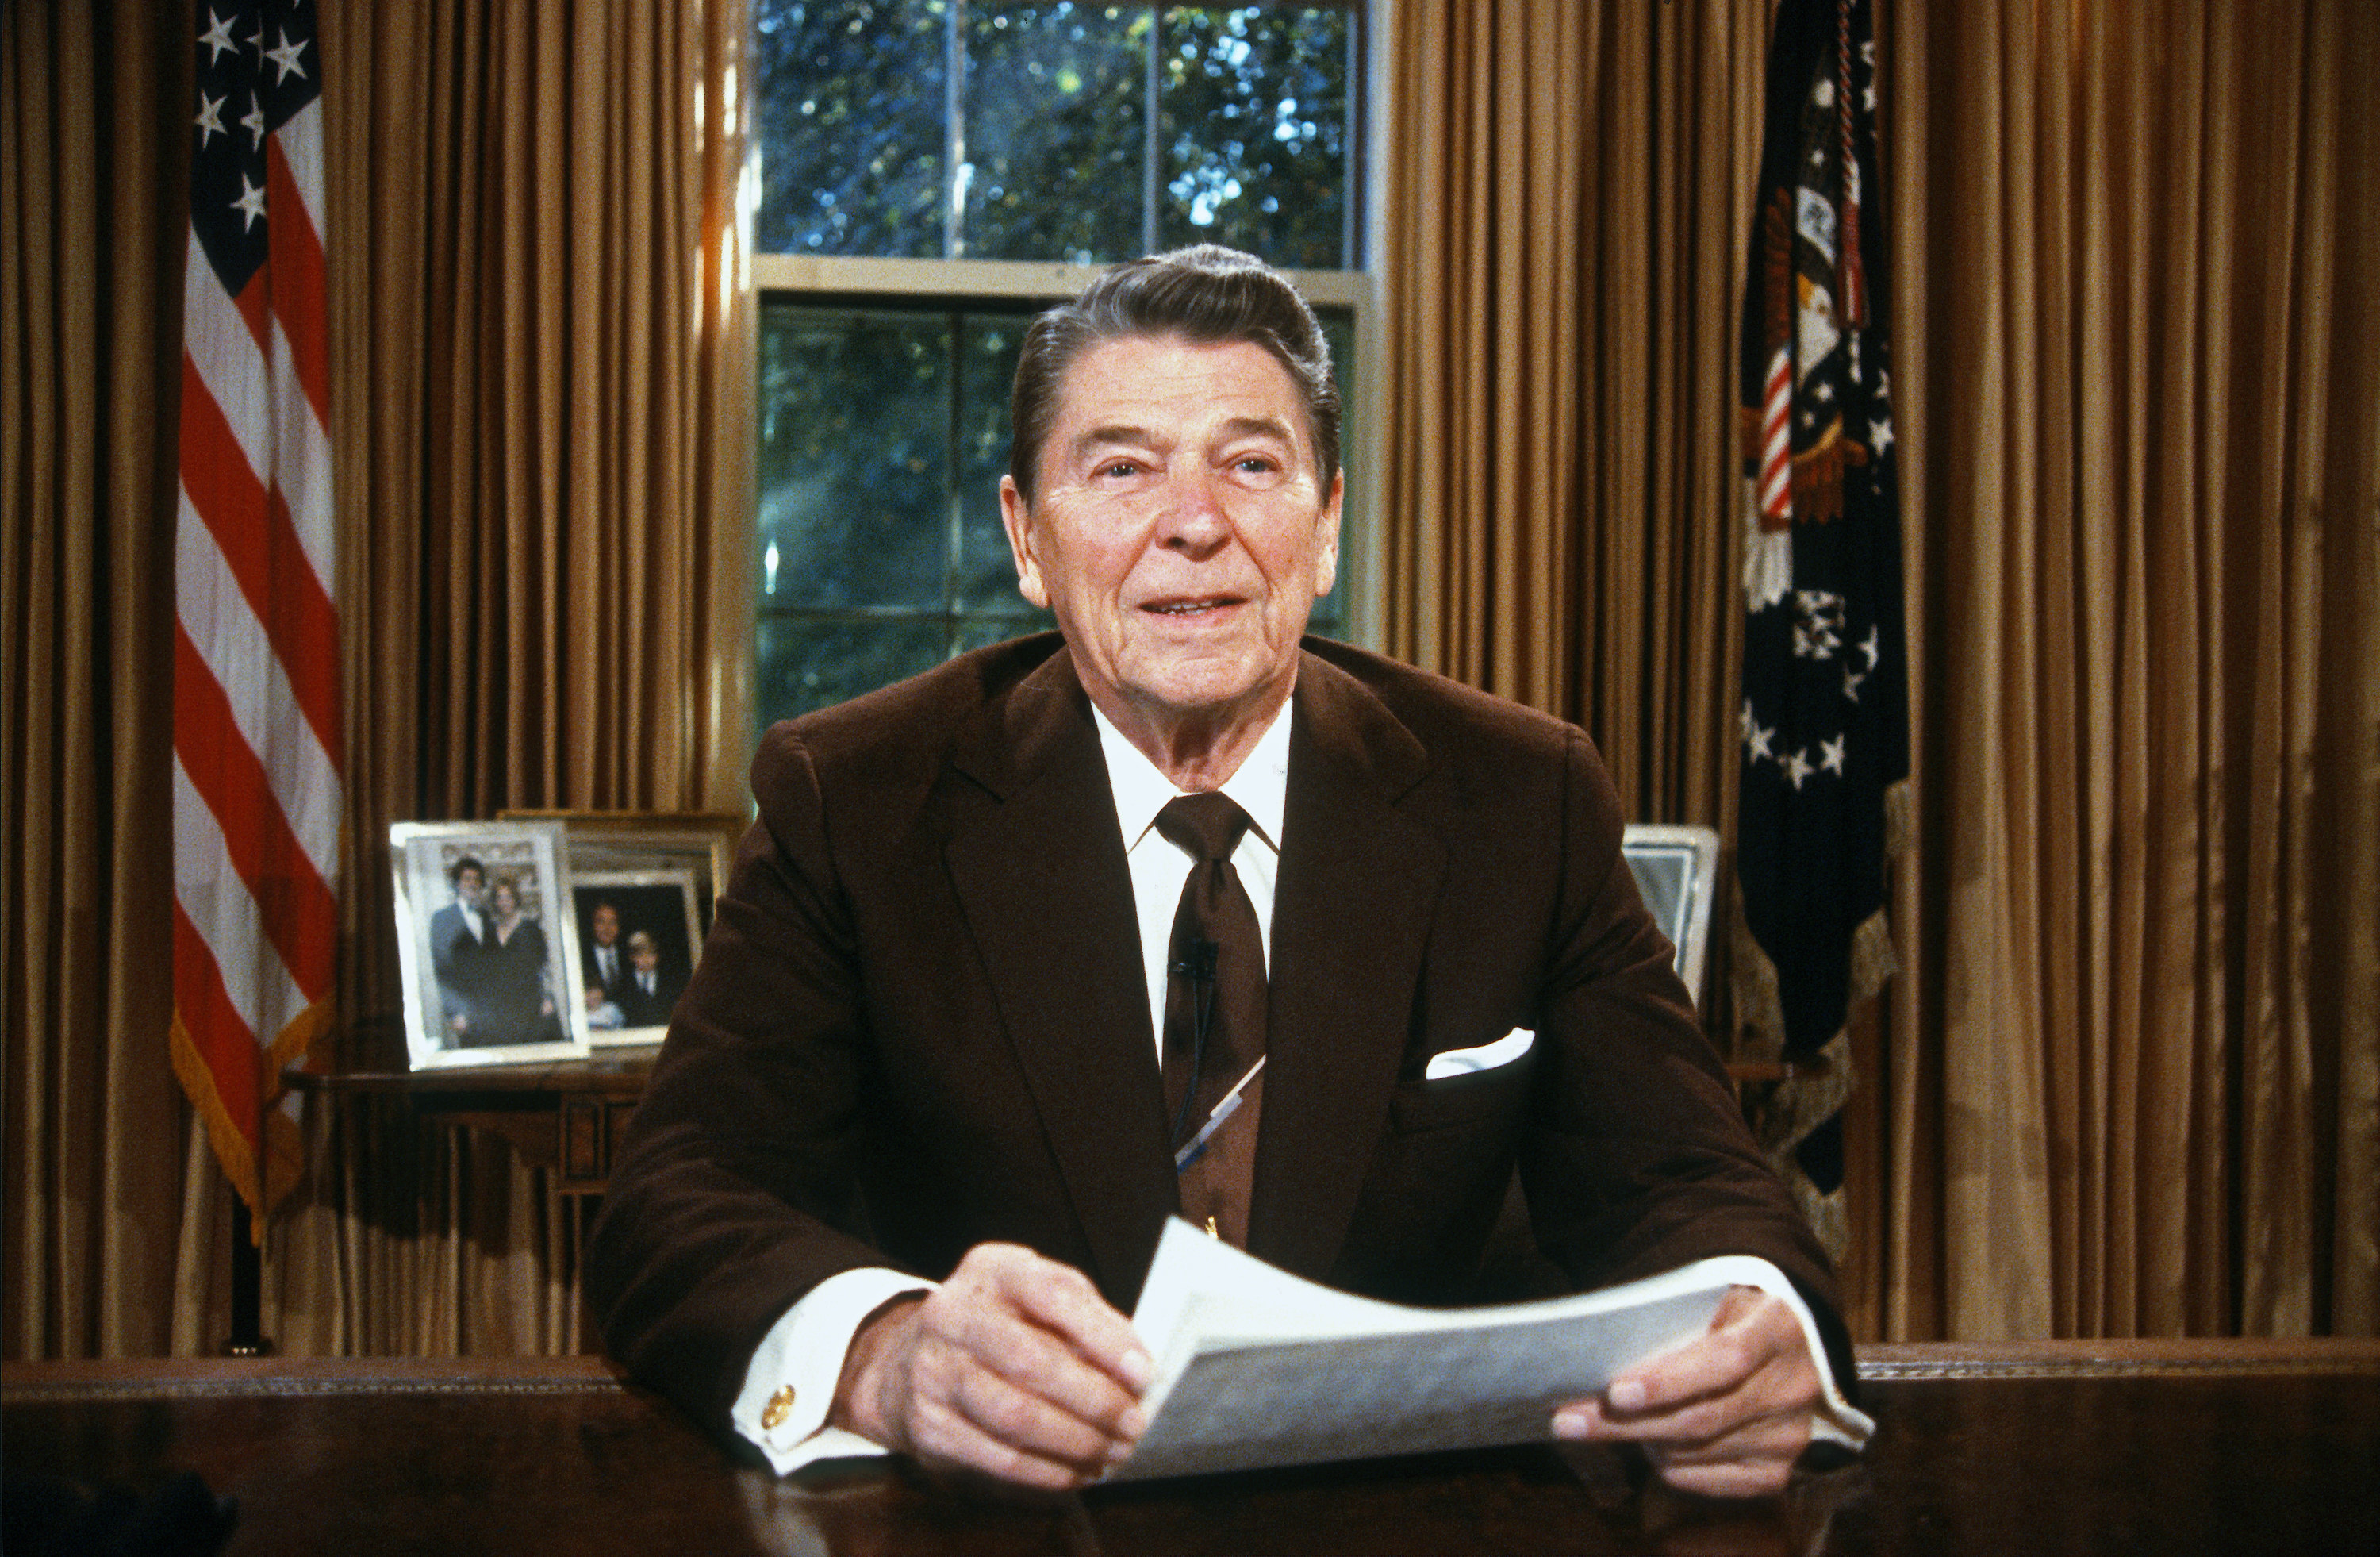 Ronald Reagan sitting in the Oval Office